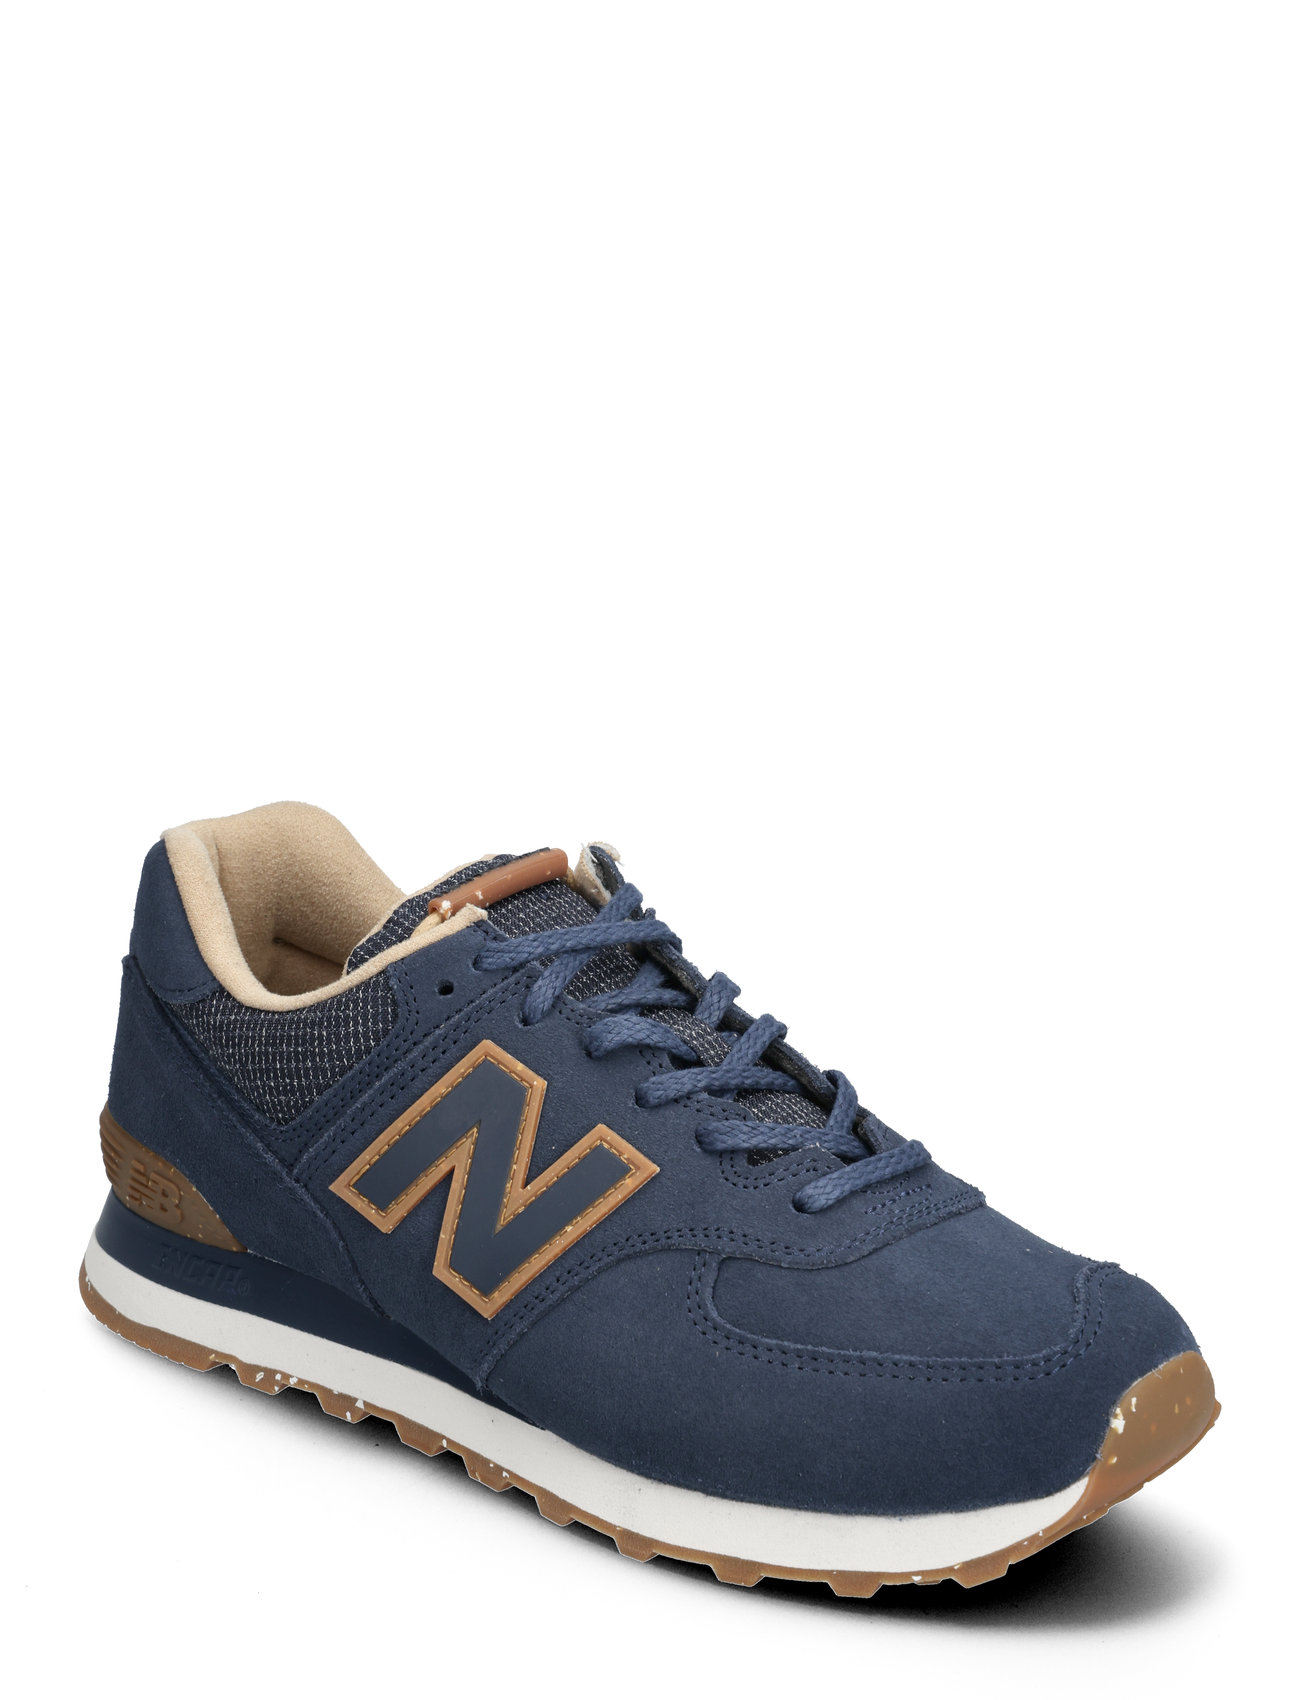 New Balance 574 Sport Sneakers Low-top Sneakers Navy New Balance